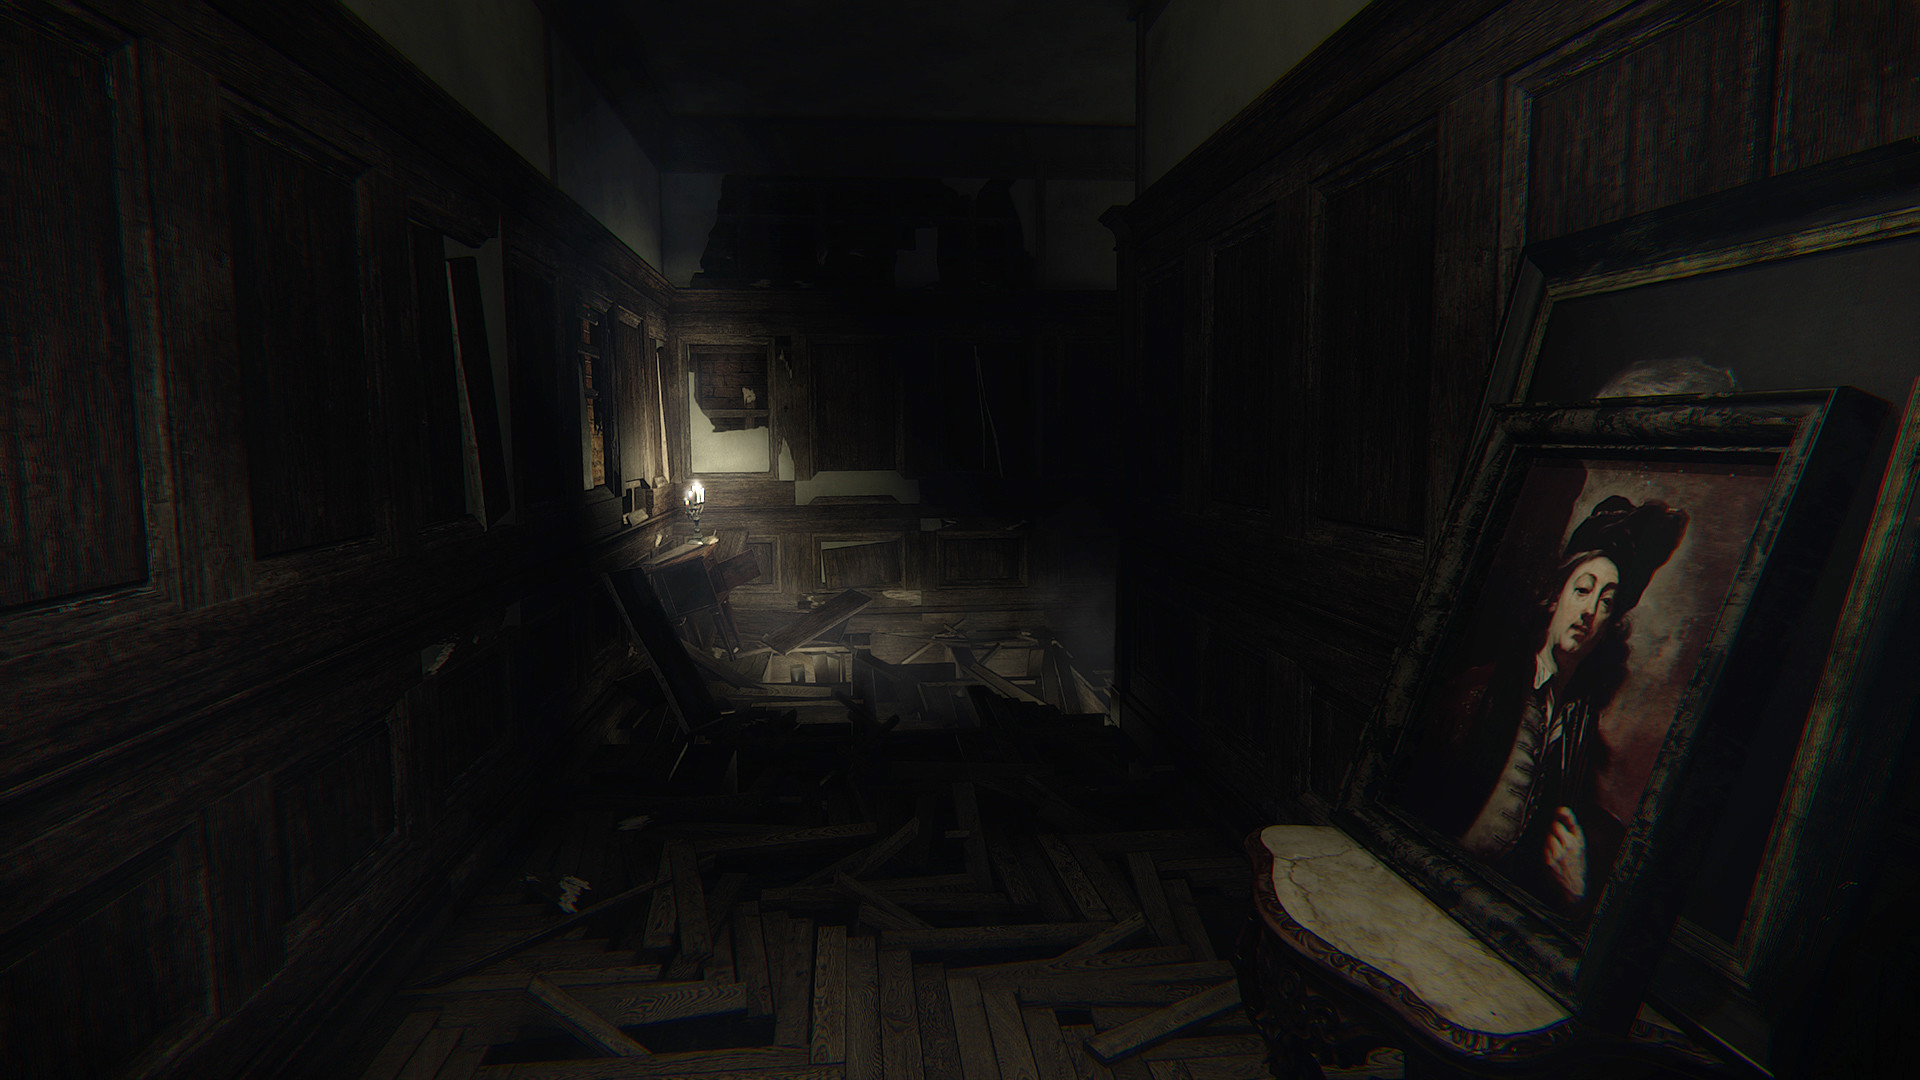 layers of fear download Archives - CroTorrents